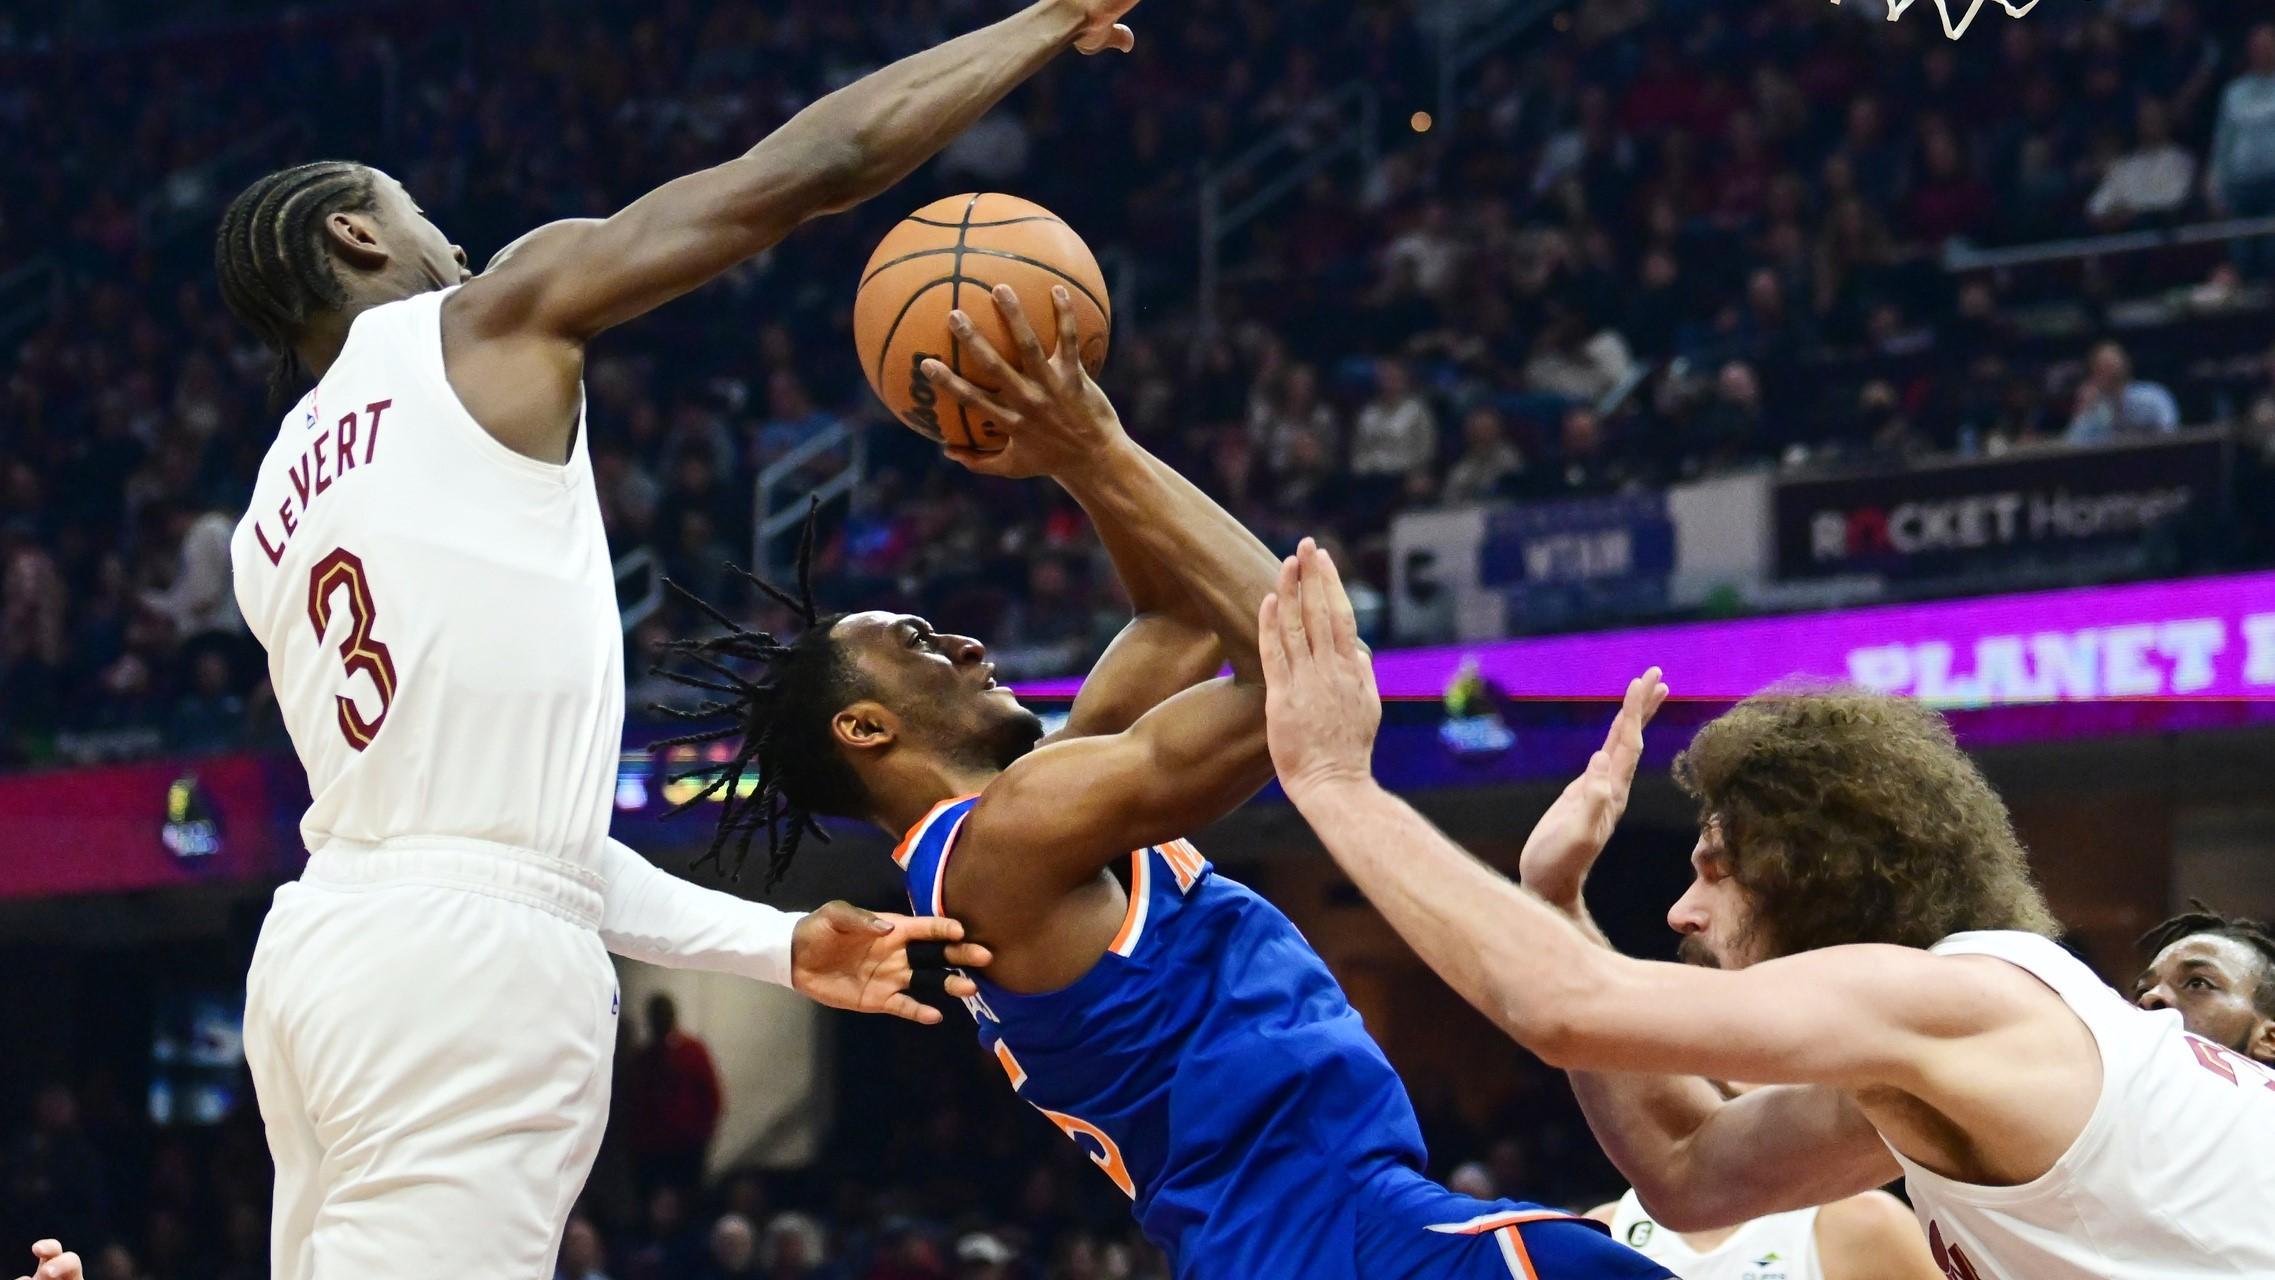 Mar 31, 2023; Cleveland, Ohio, USA; New York Knicks guard Immanuel Quickley (5) drives to the basket between Cleveland Cavaliers guard Caris LeVert (3) and center Robin Lopez (33) during the first half at Rocket Mortgage FieldHouse. / Ken Blaze-USA TODAY Sports